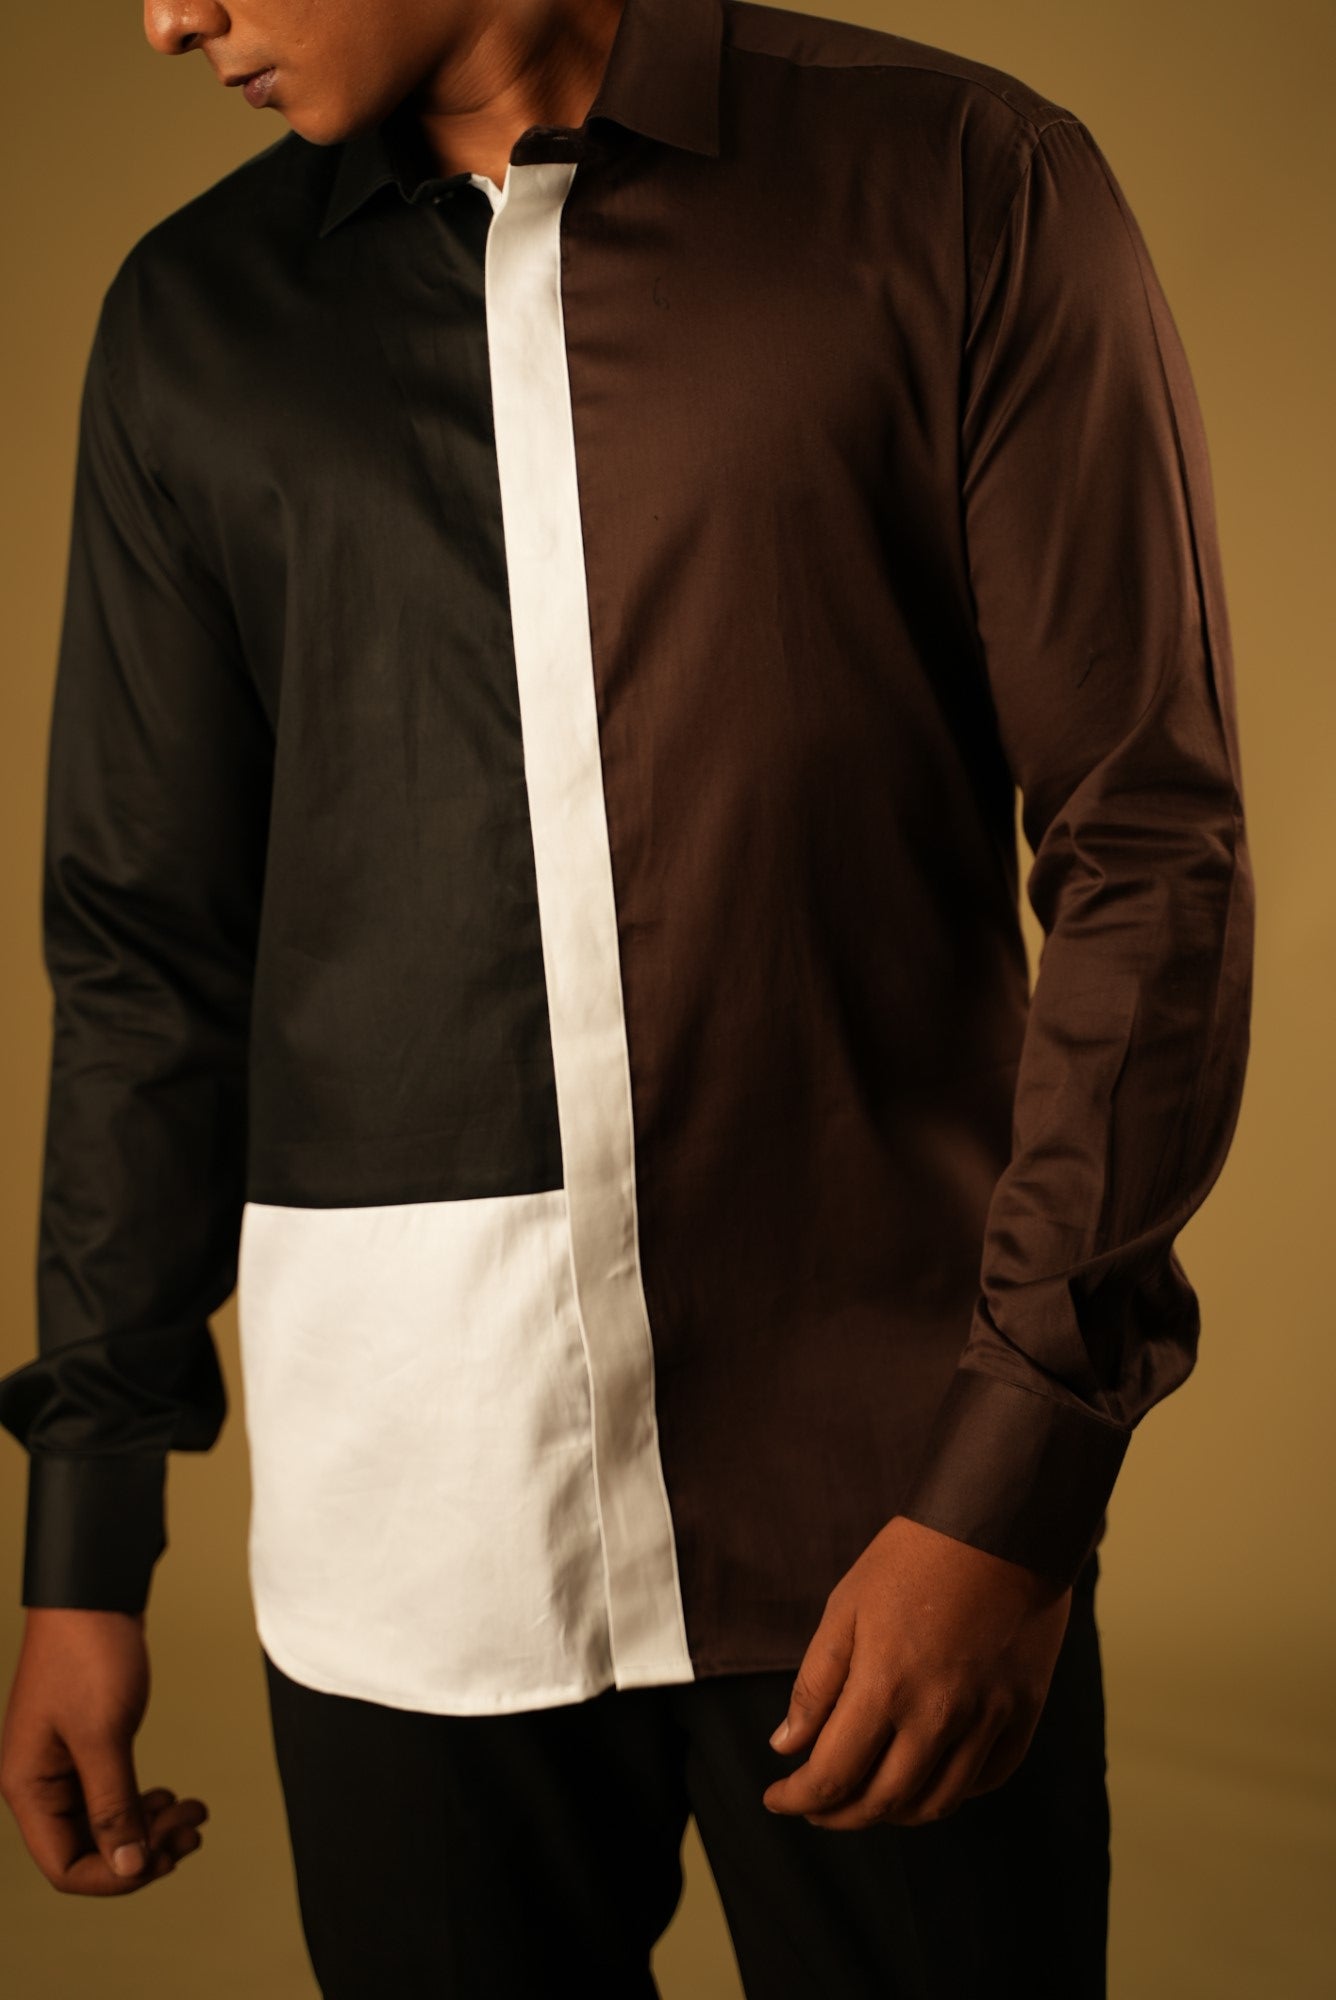 Men's Brown, Black & White Color One Trizy Shirt Full Sleeves Casual Shirt - Hilo Design